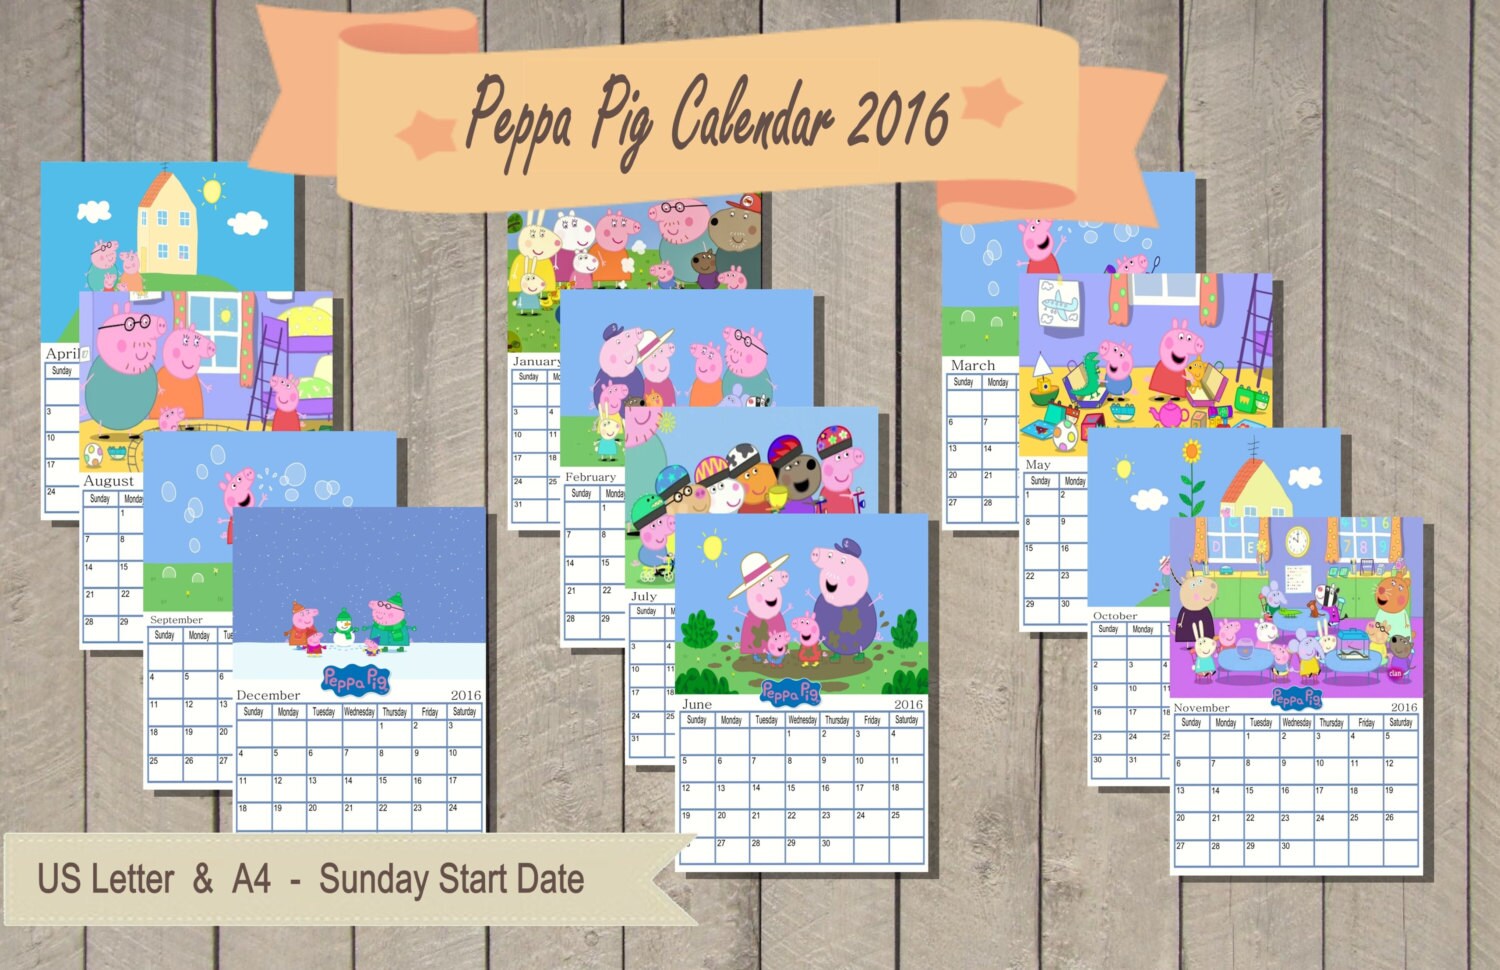 Peppa Pig Calendar. Monthly 2016. by ennergisShop on Etsy